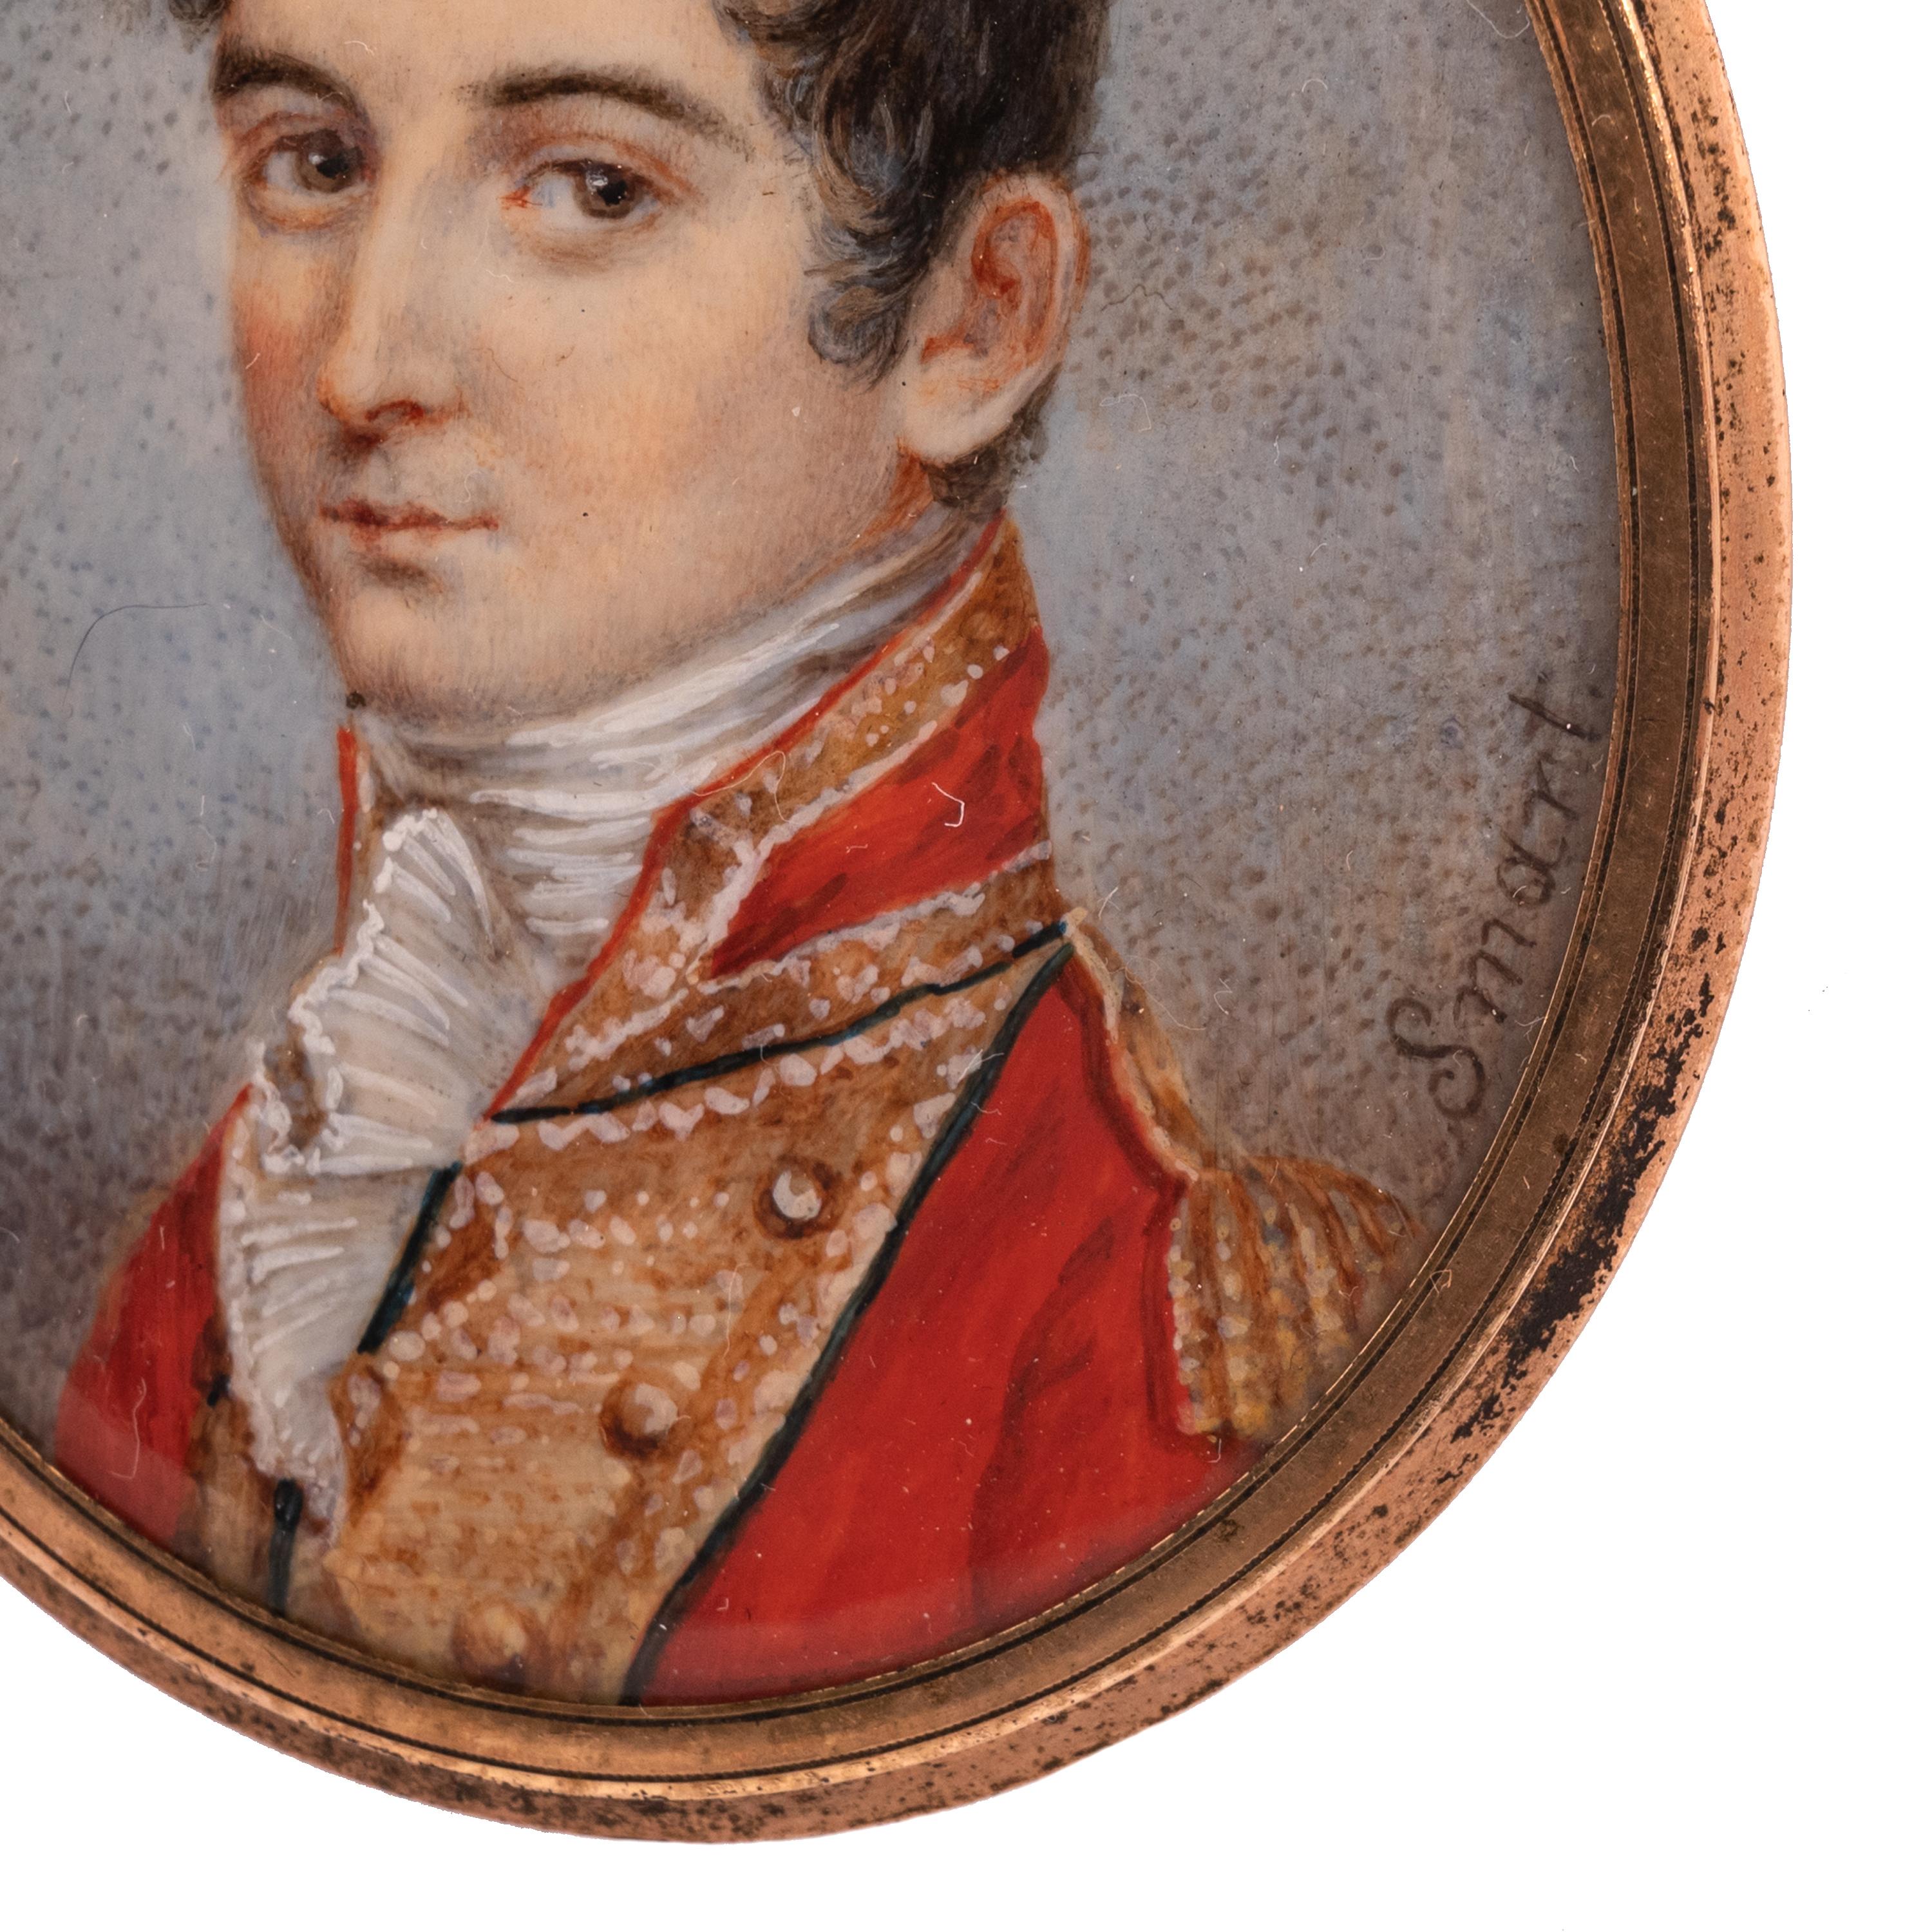 A fine antique miniature portrait painting, John Smart (1741-1811). The painting circa 1780.
A very handsome portrait miniature of a young military officer, painted on an ivory wafer and signed 